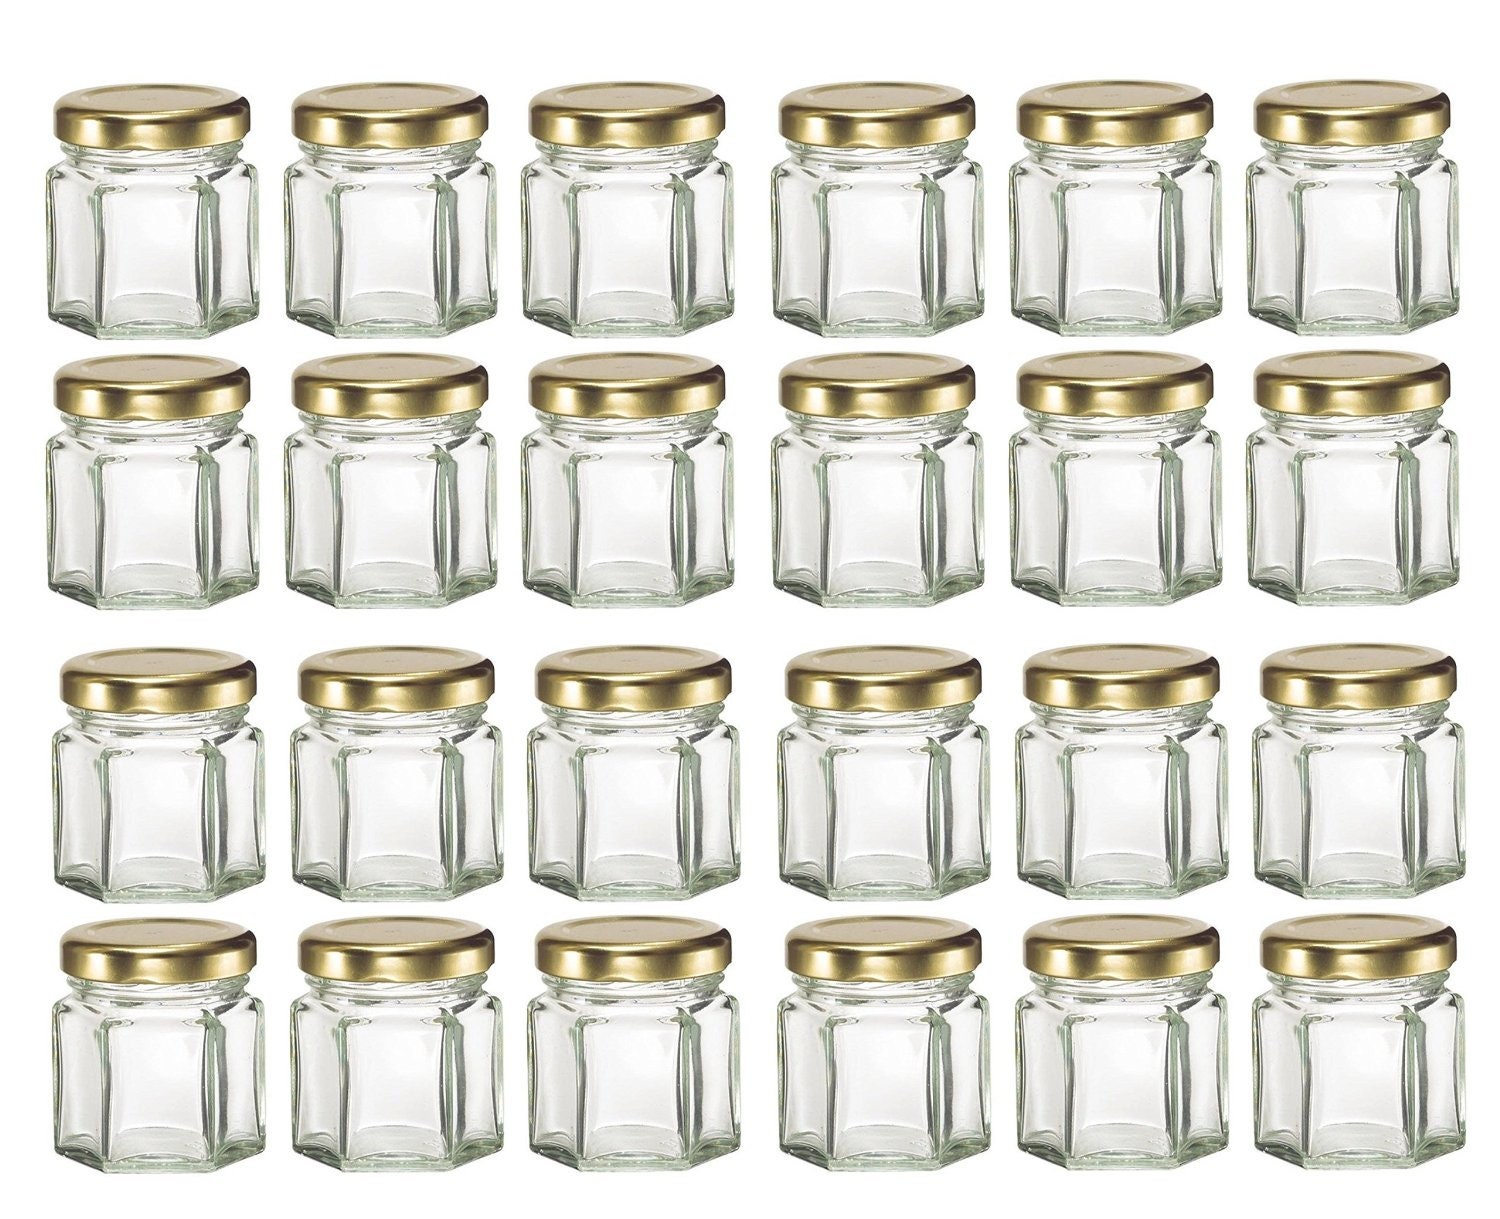 60 Pcs 1.5 oz (50ML) Hexagon Jars/Glass Jars with Gold Lids, Small Mason  Jars for Wedding, Party Favors, Shower Favors, Baby Foods, Honey, Canning